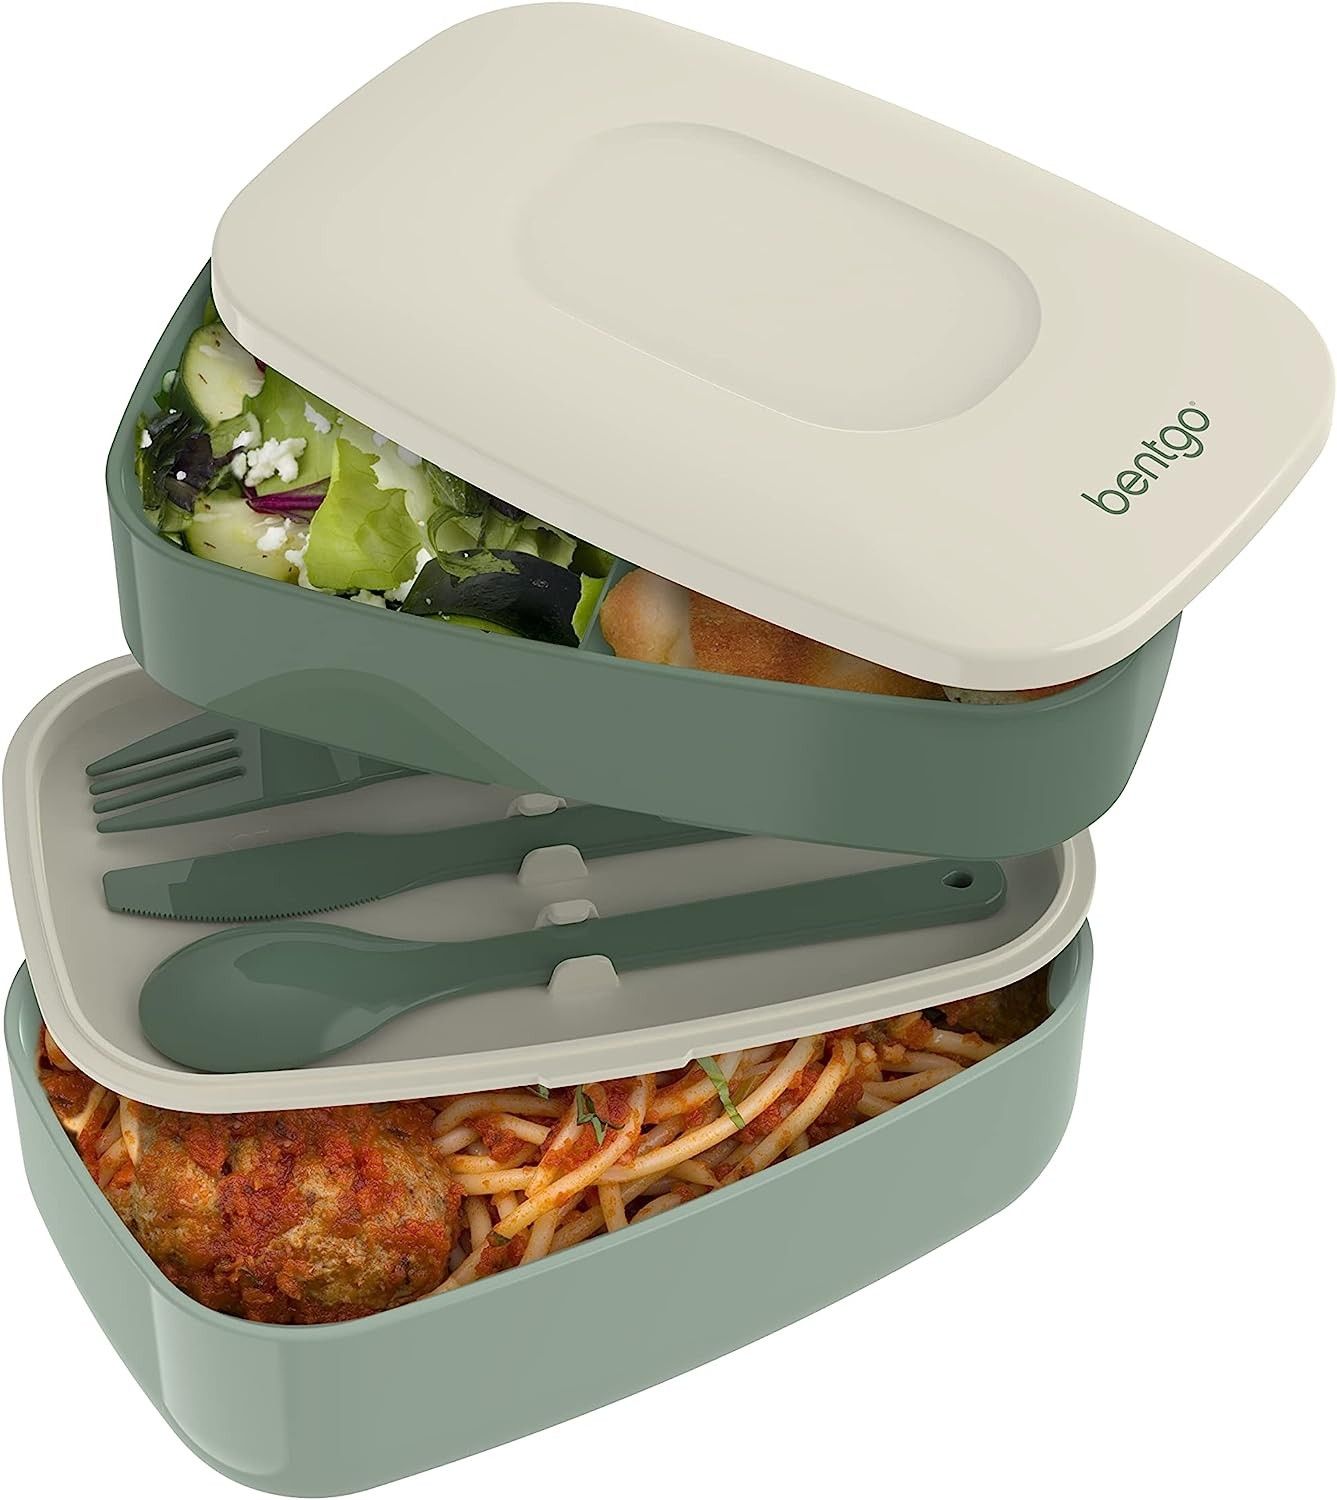 W&P Porter bowl review: This sealed container makes lunchtime a breeze